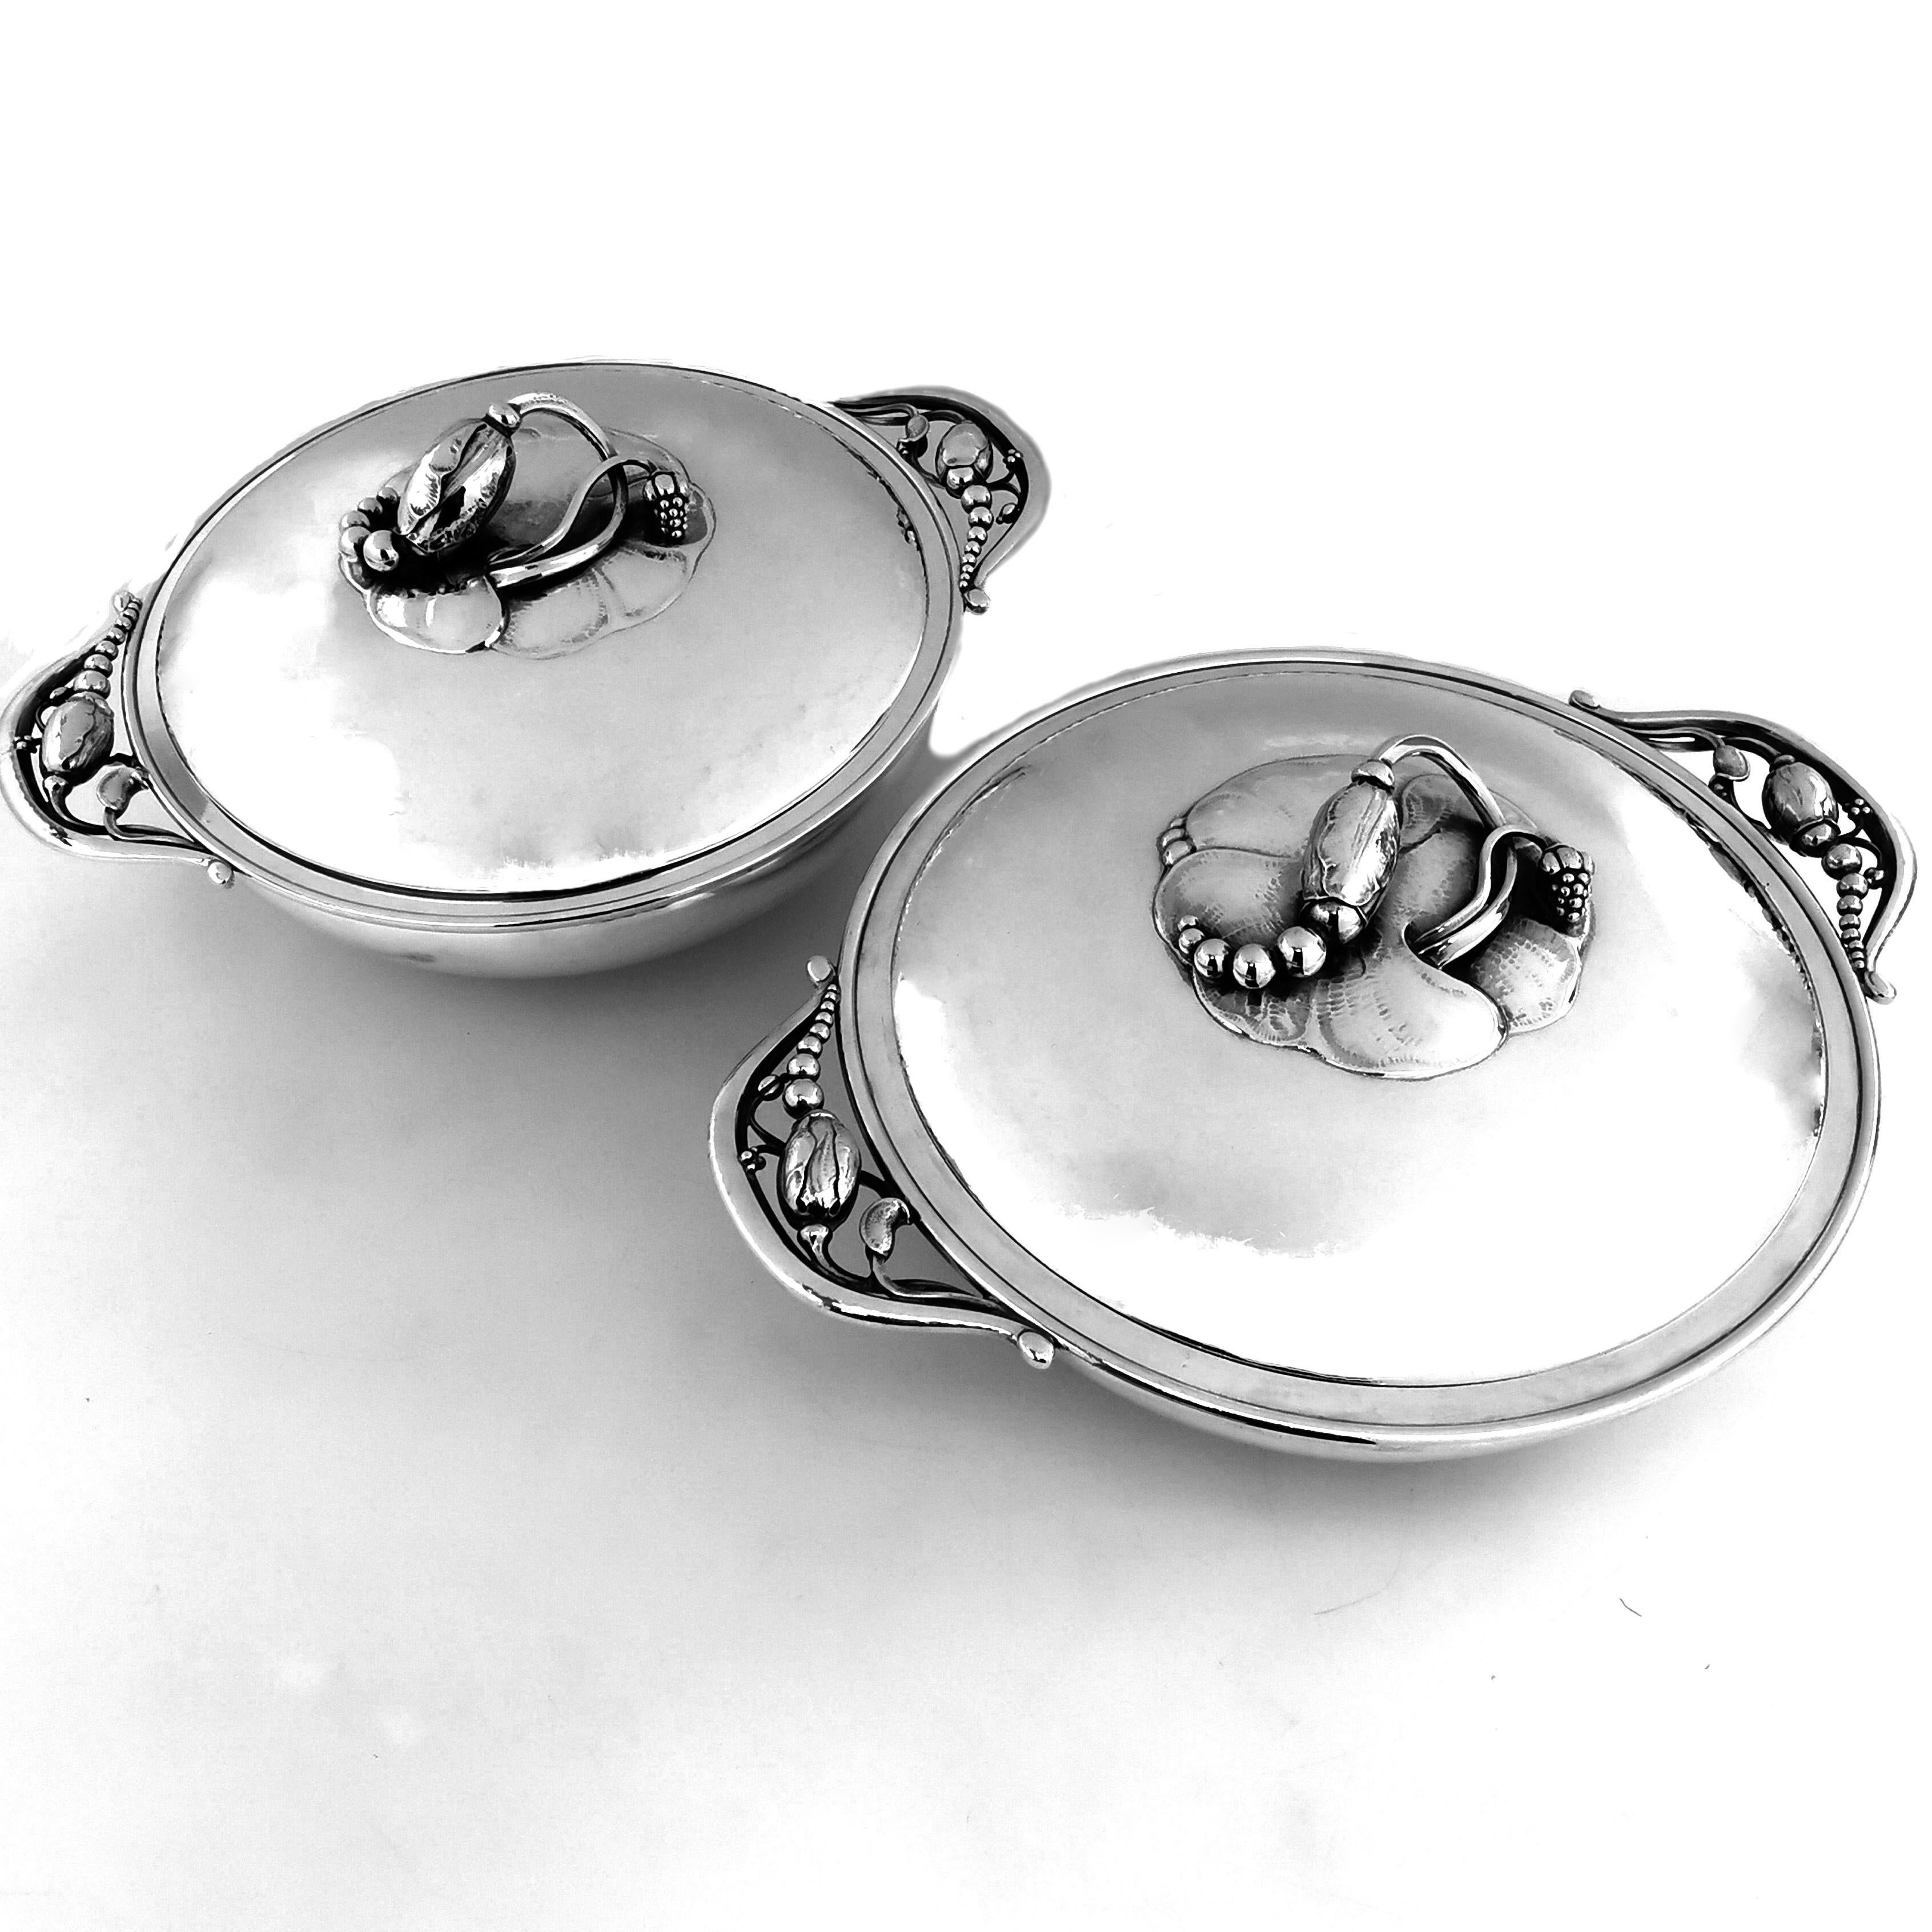 Arts and Crafts Pair of Georg Jensen Silver Blossom Vegetable Entree Dishes Tureens 2A c. 1905